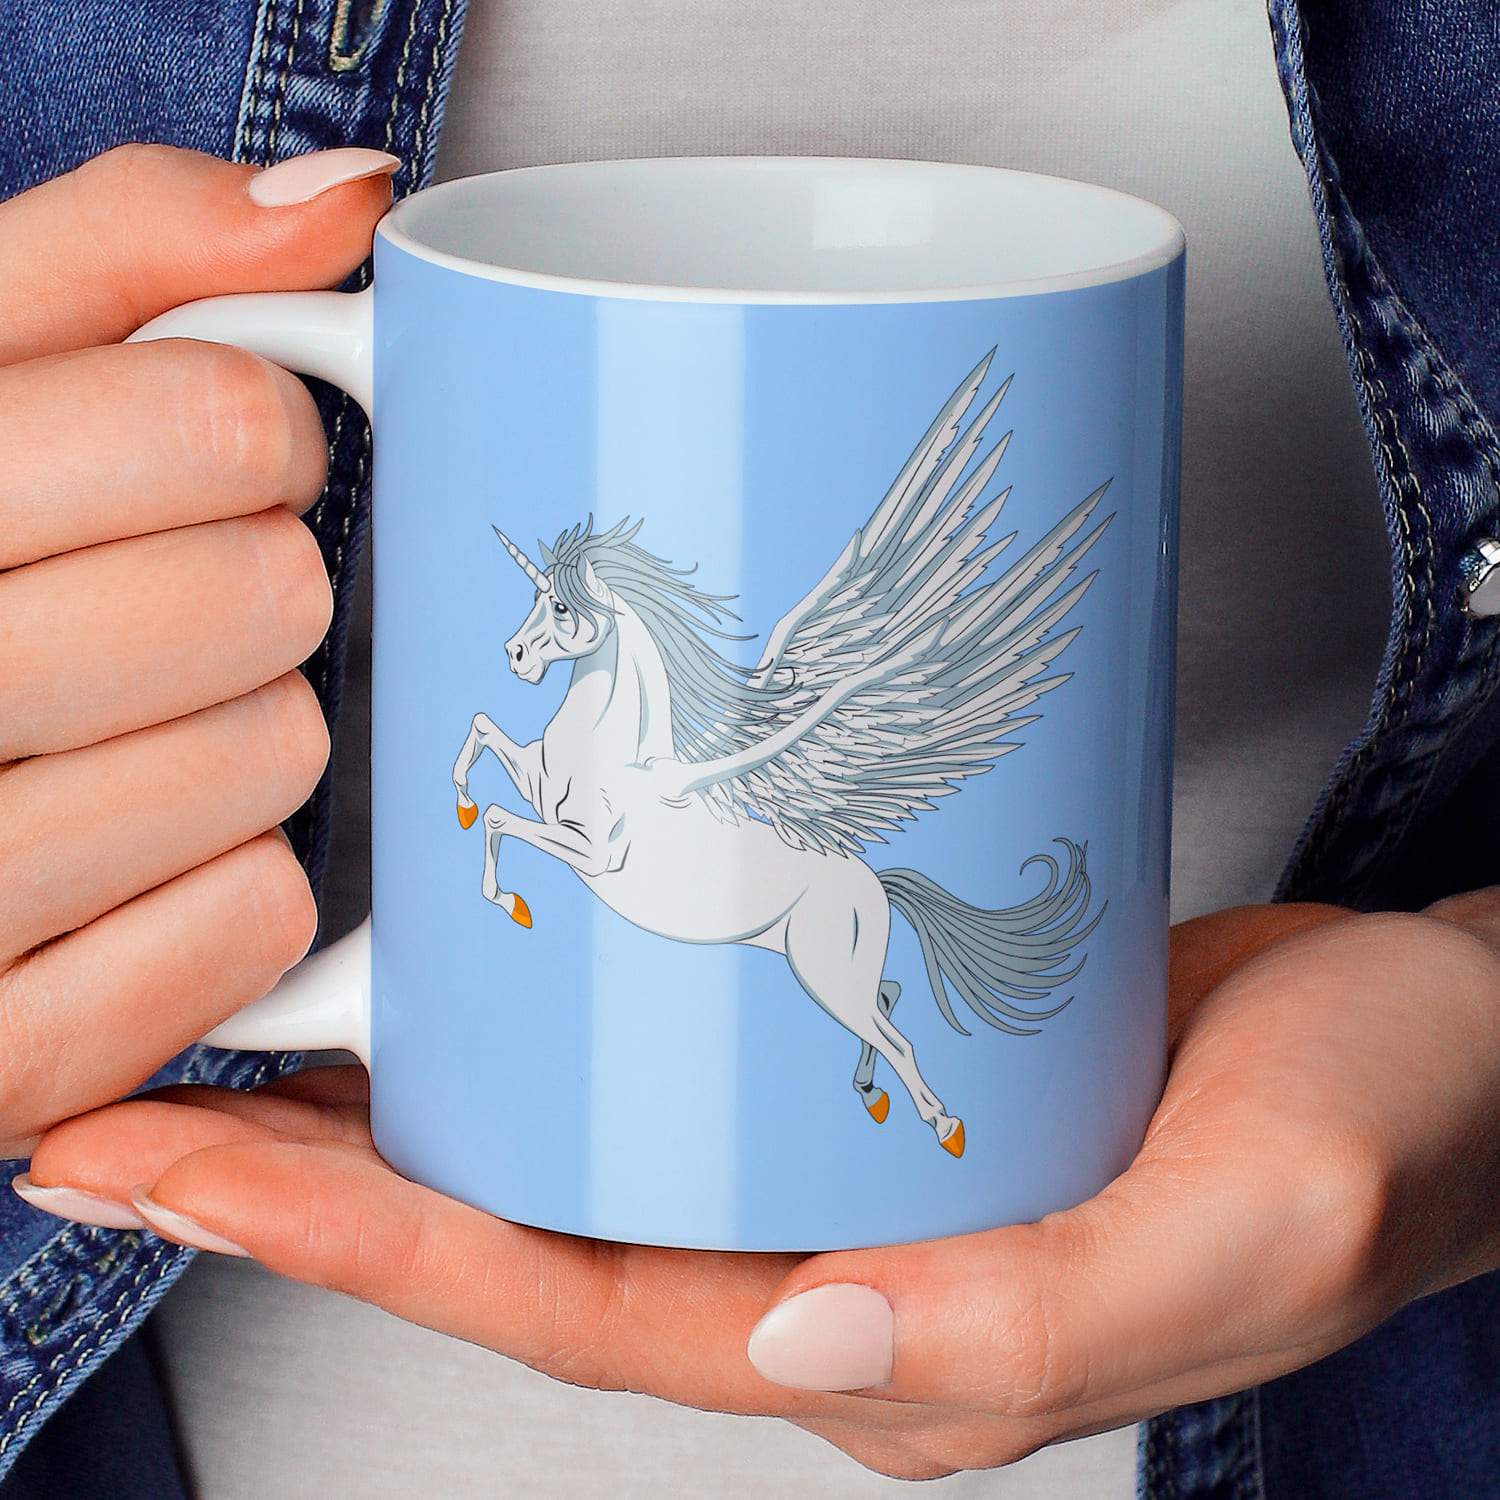 Blue cup with unicorn print.